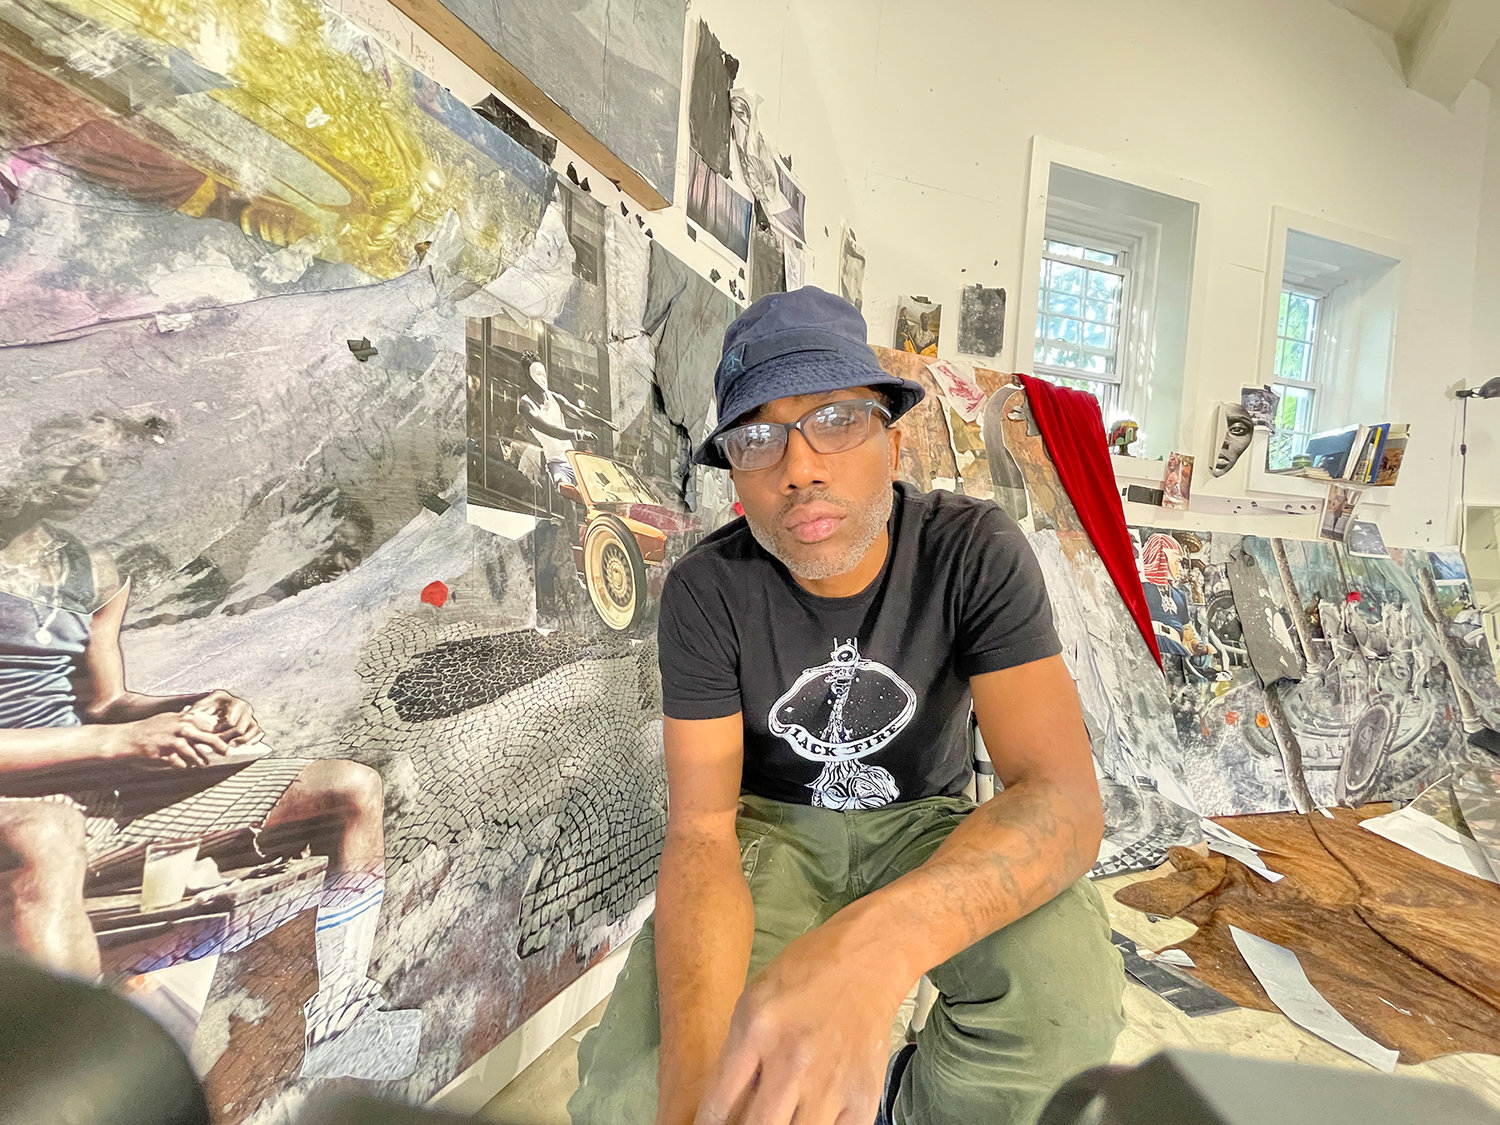 Washington, D.C.-based artist Shaunté Gates will discuss his work for the PrattMWP Easton Pribble Lecture Series at 3:30 p.m. Feb. 23 in the Bank of Utica-Sinnott Family Auditorium at the Museum of Art in Utica.